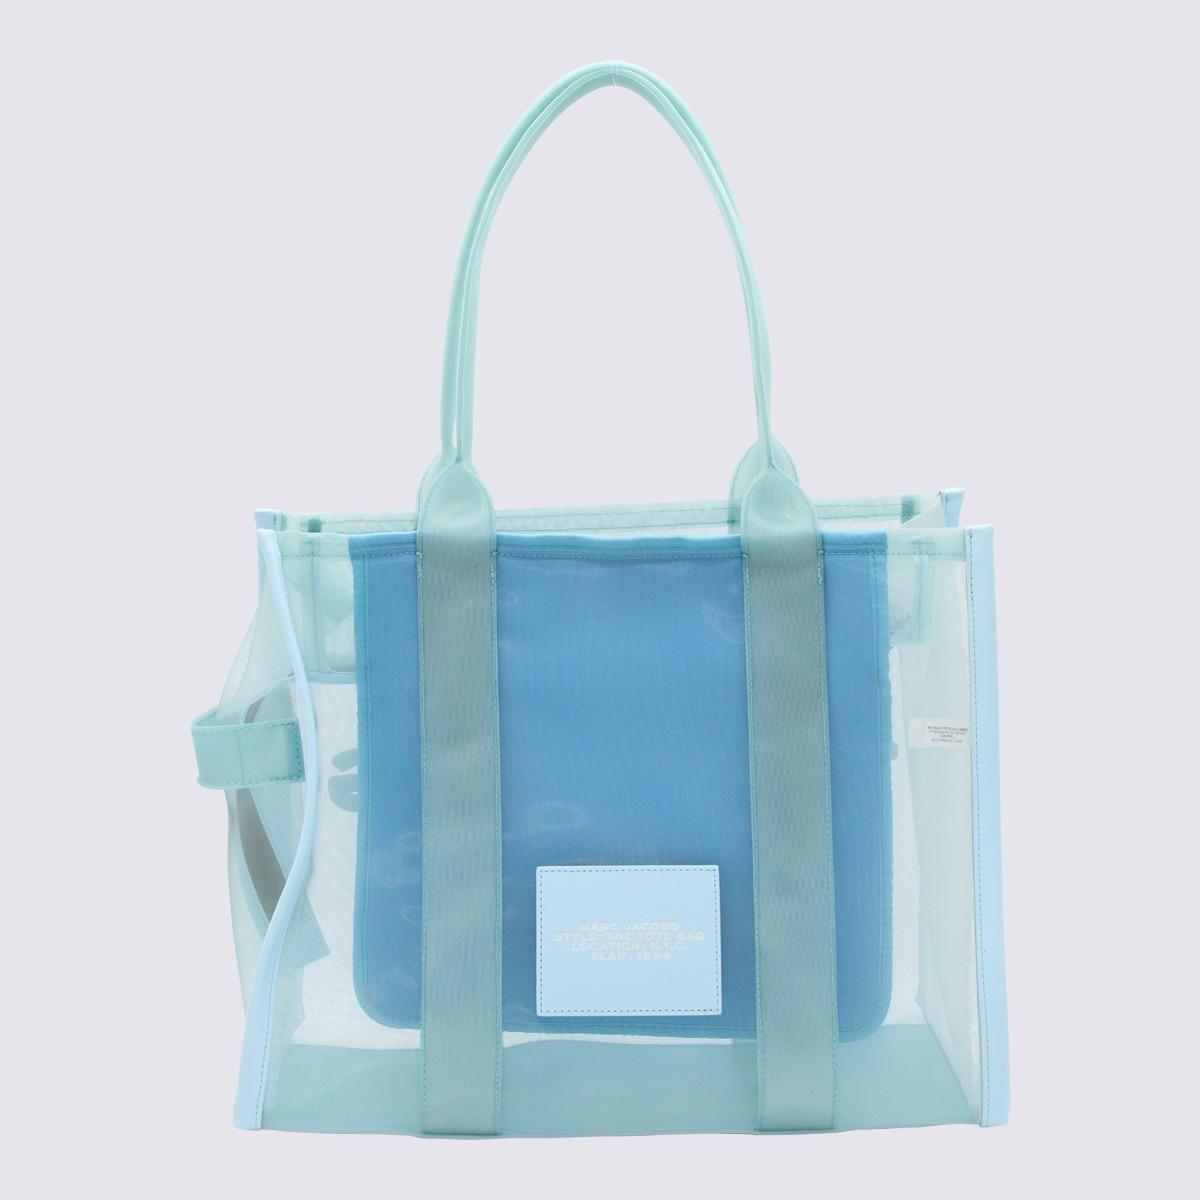 Marc Jacobs Pale Blue The Mesh Large Tote Bag